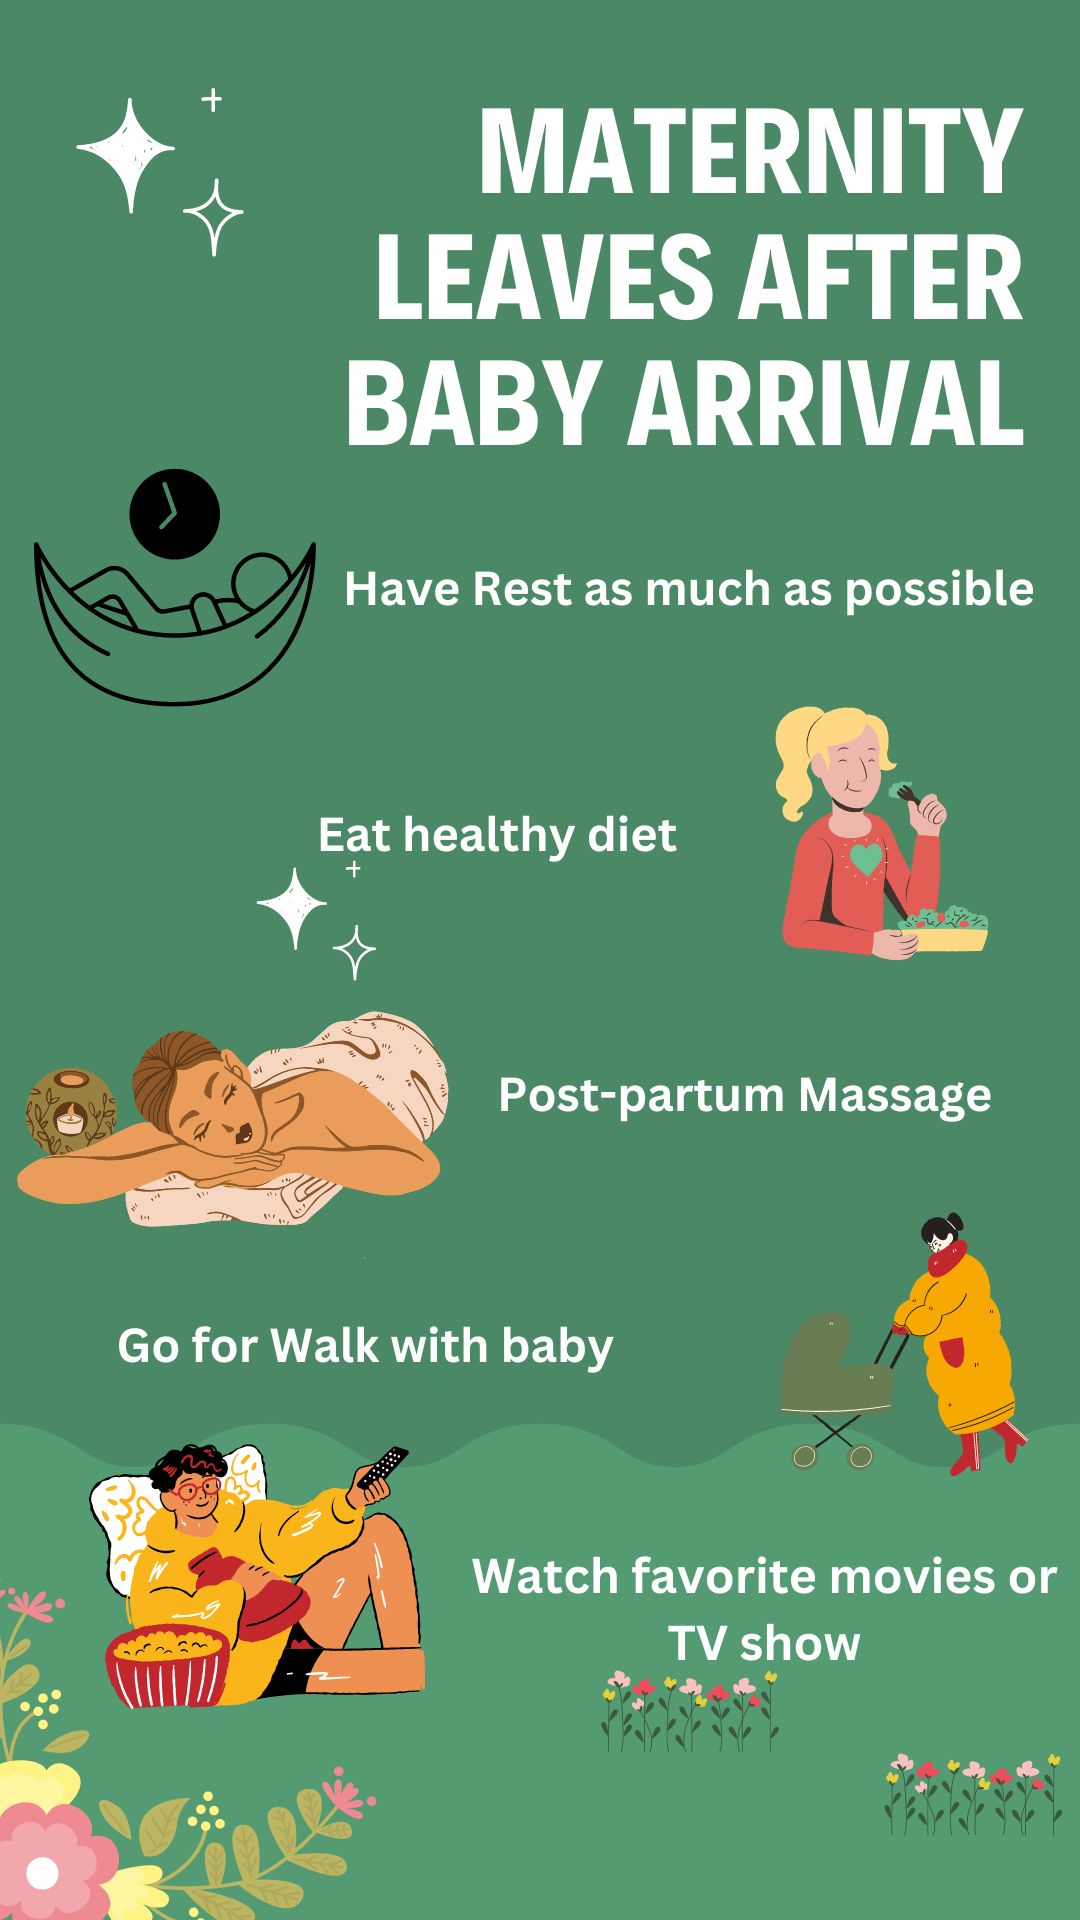 What to do on maternity leaves